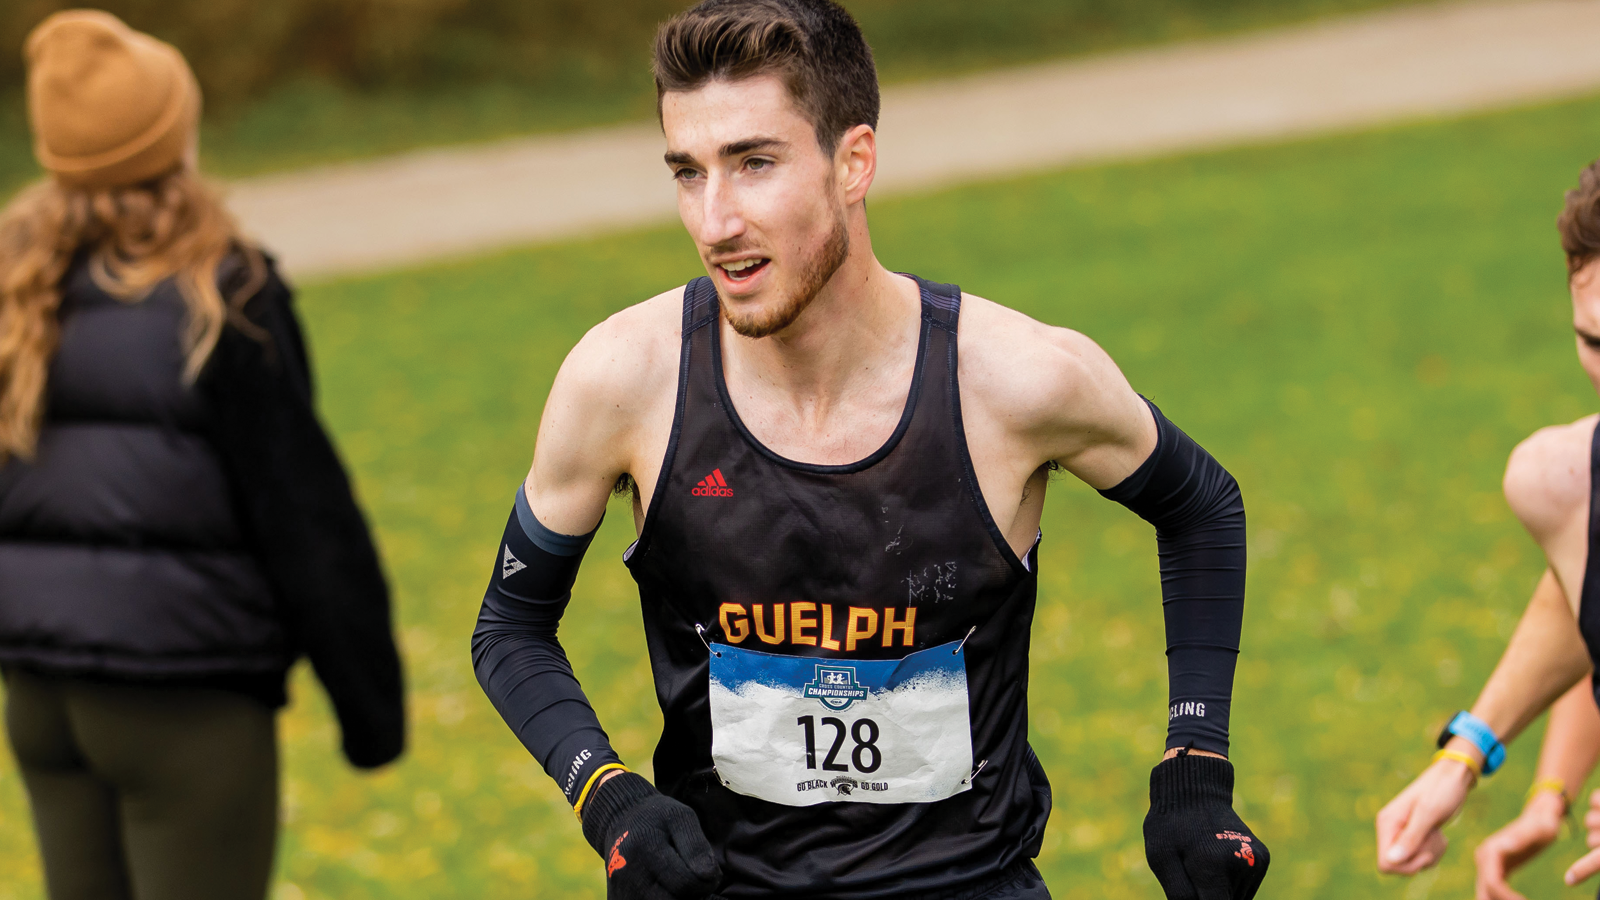 Guelph men's cross country runner Nicholas Bannon running on course during the OUA Championships